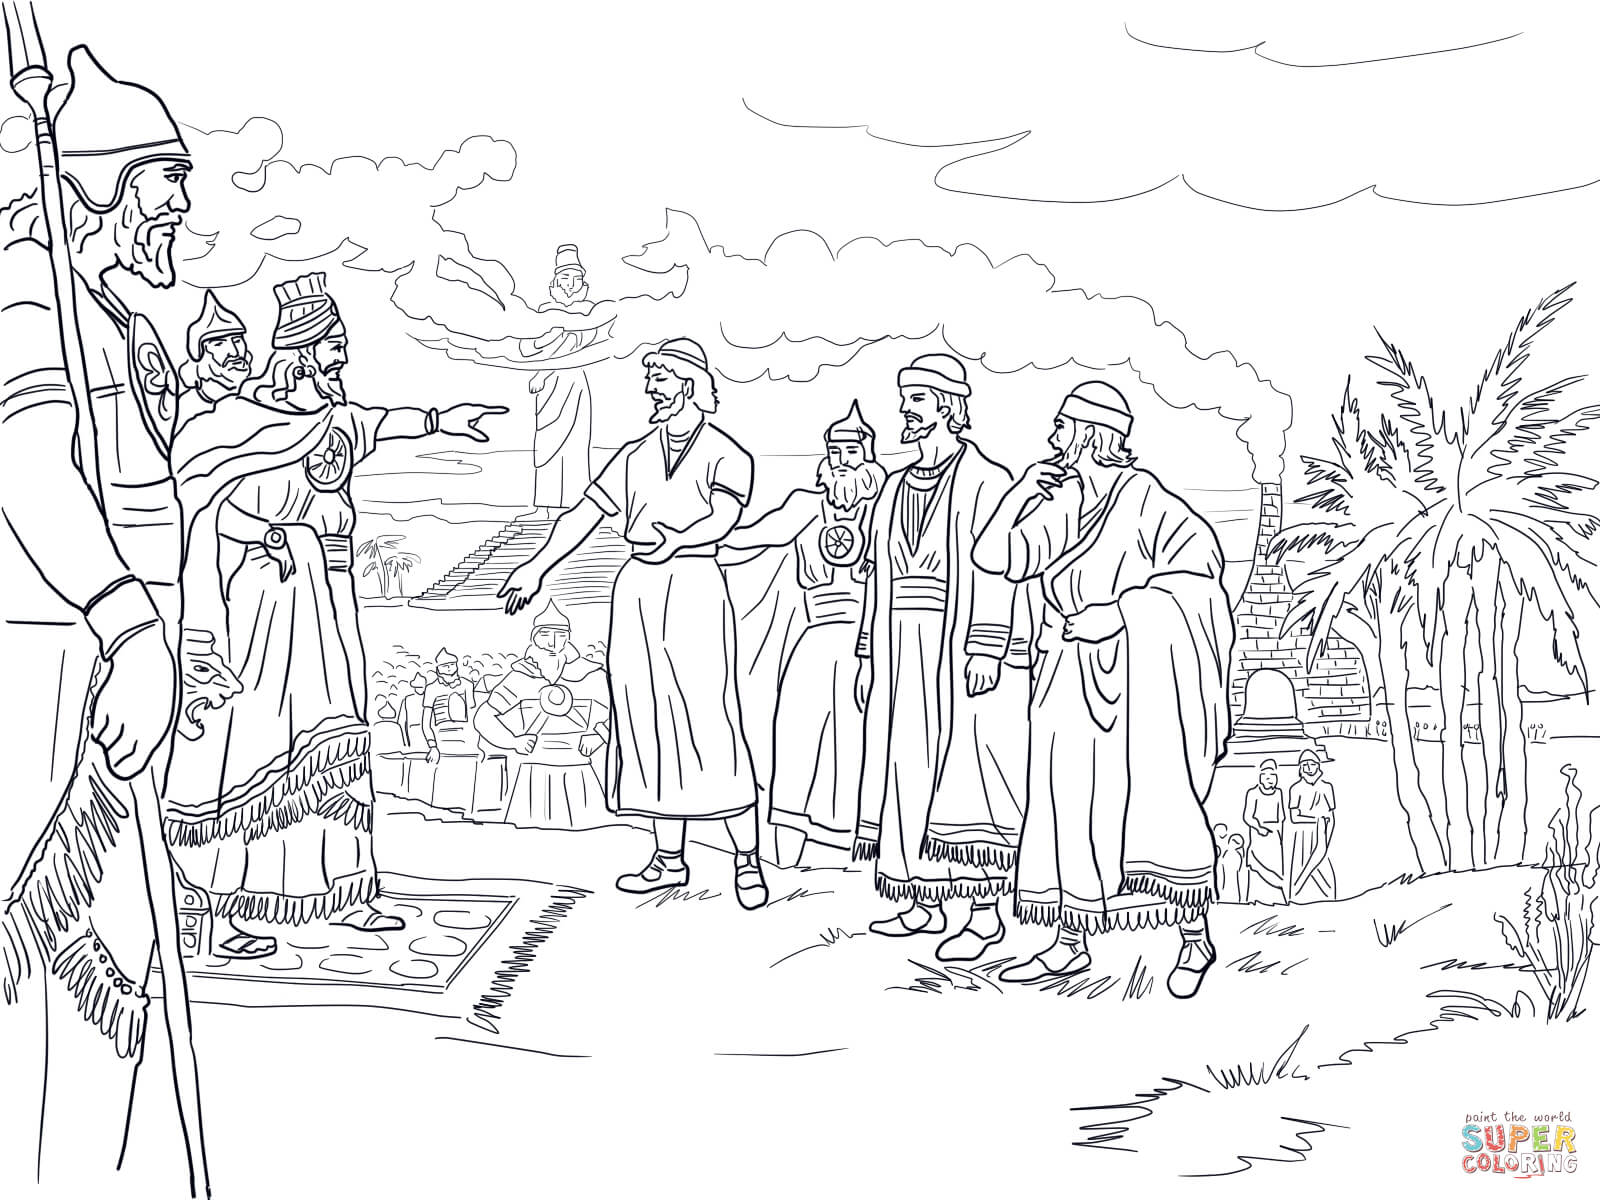 Shadrach meshach and abednego before king nebuchadnezzar coloring page free printable coloring pages